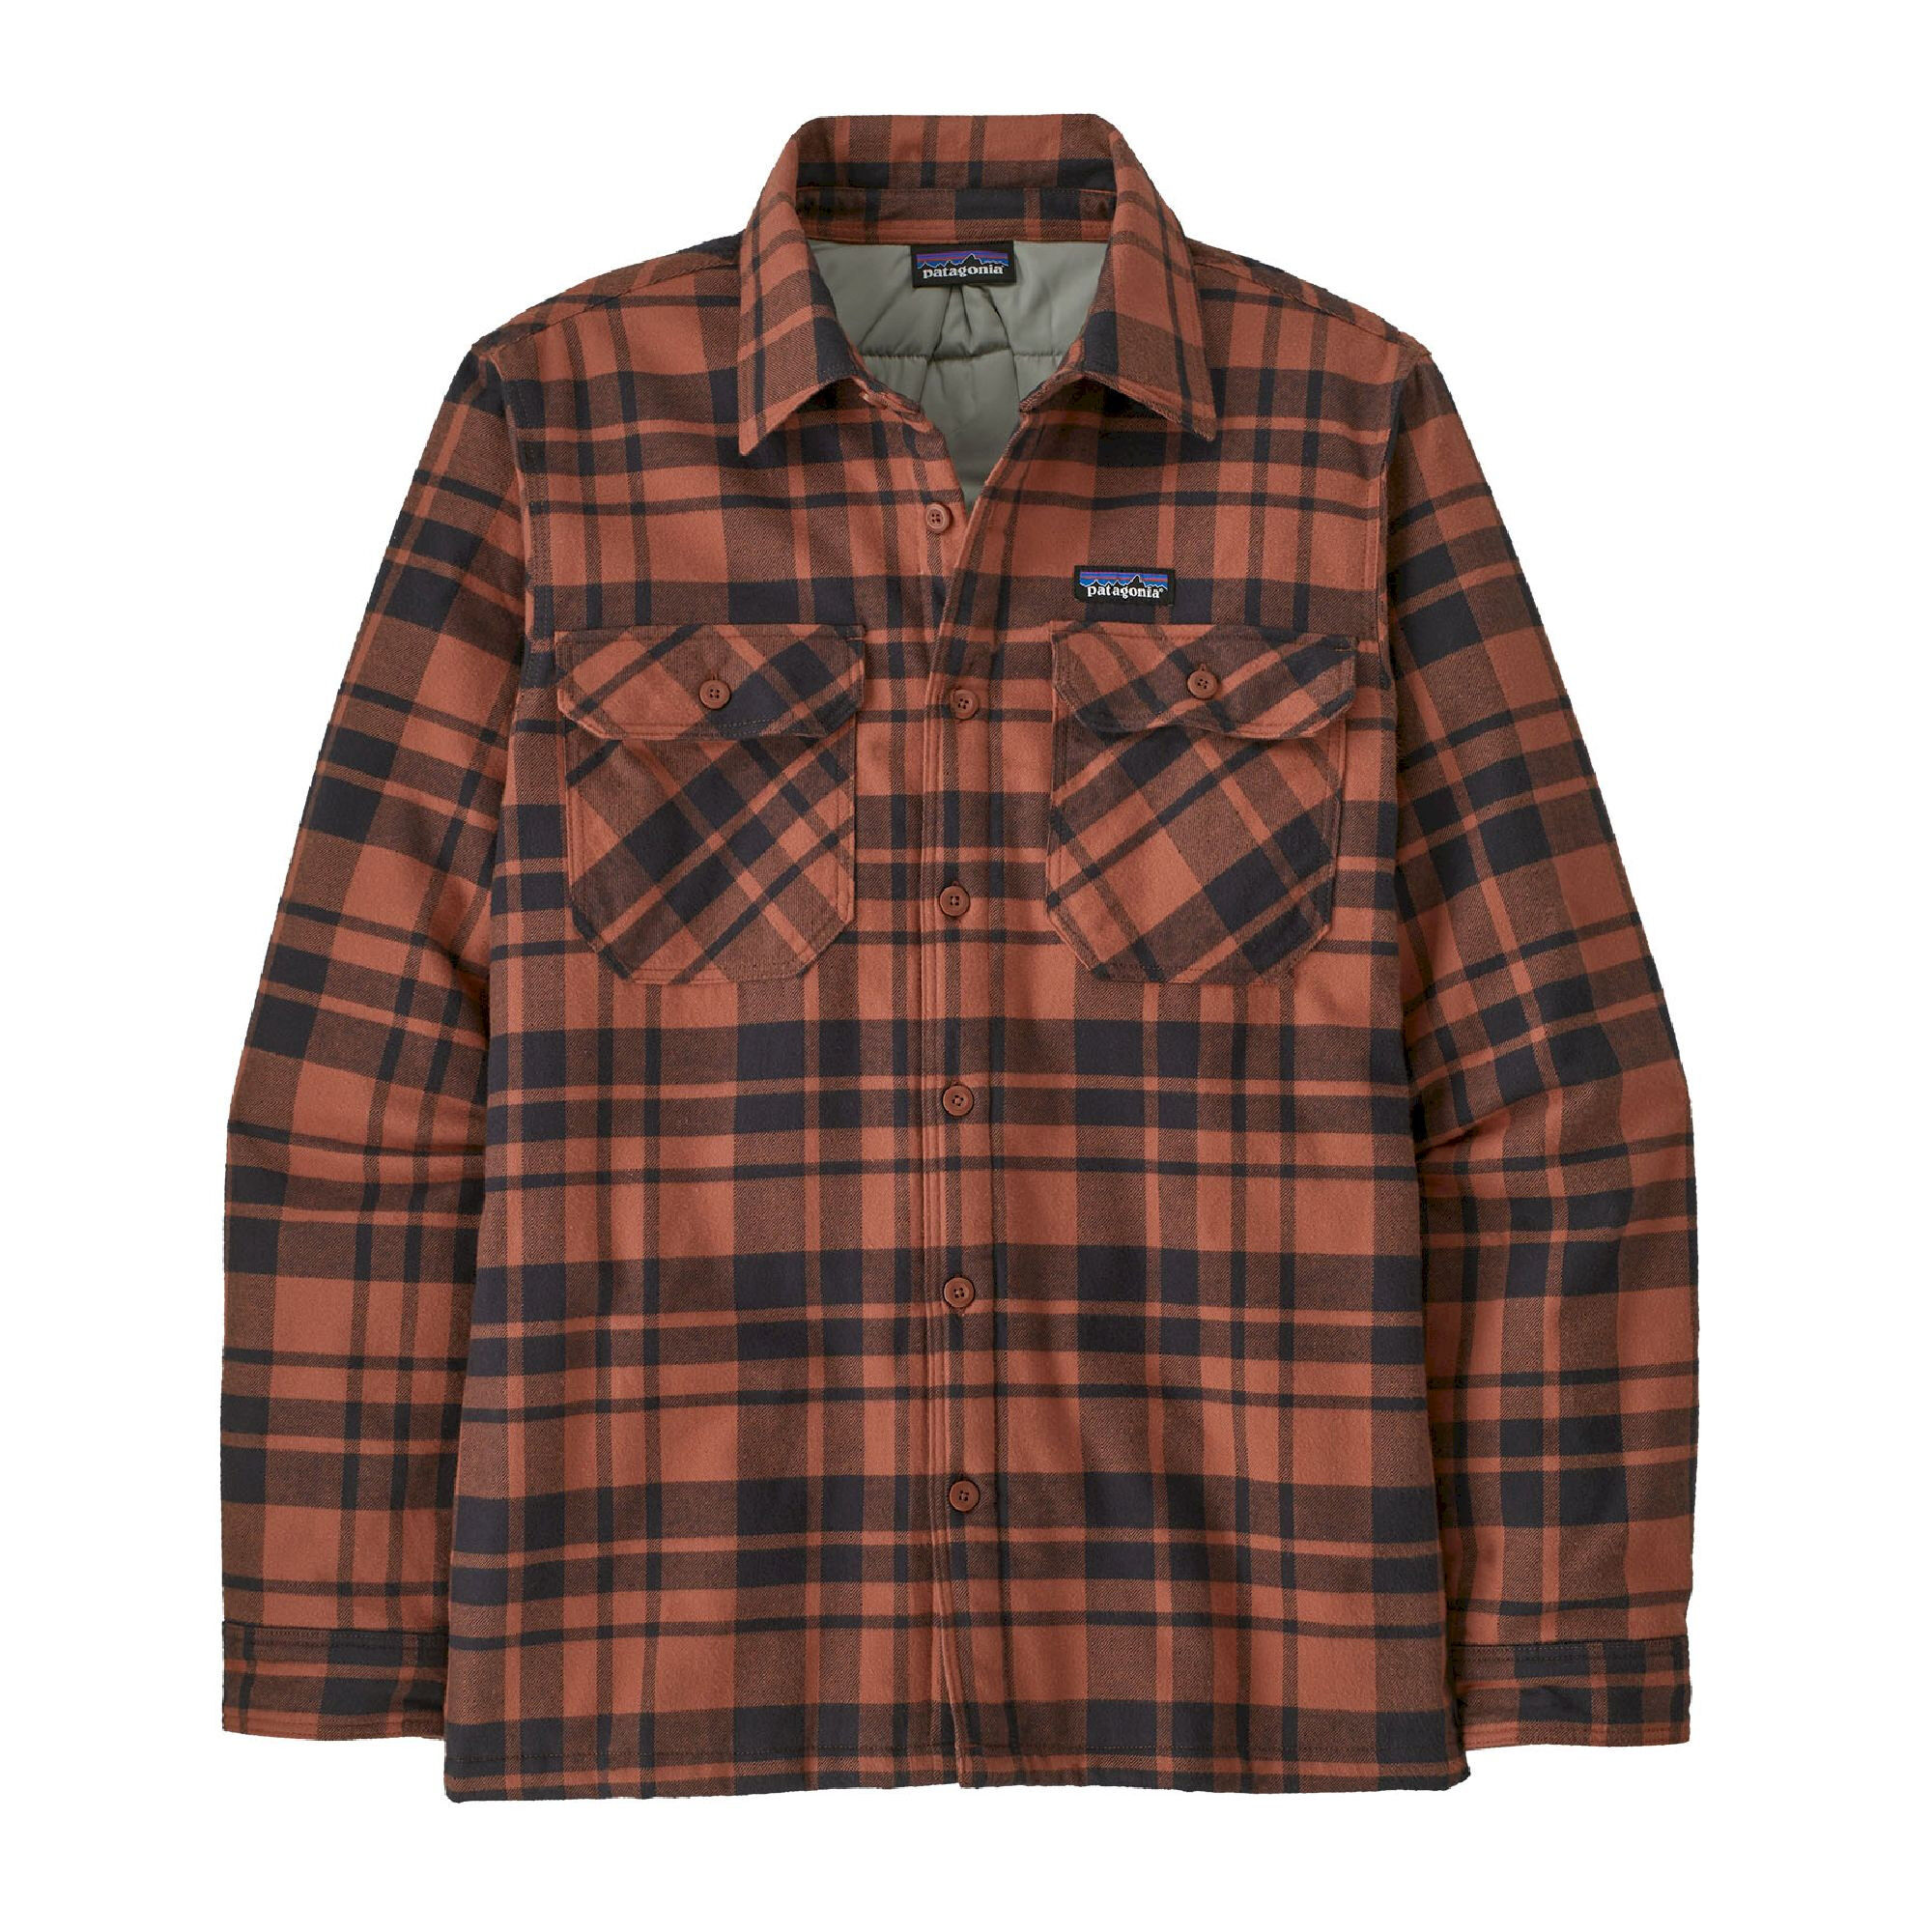 Patagonia Insulated Organic Cotton MW Fjord Flannel Shirt - Overhemd - Heren